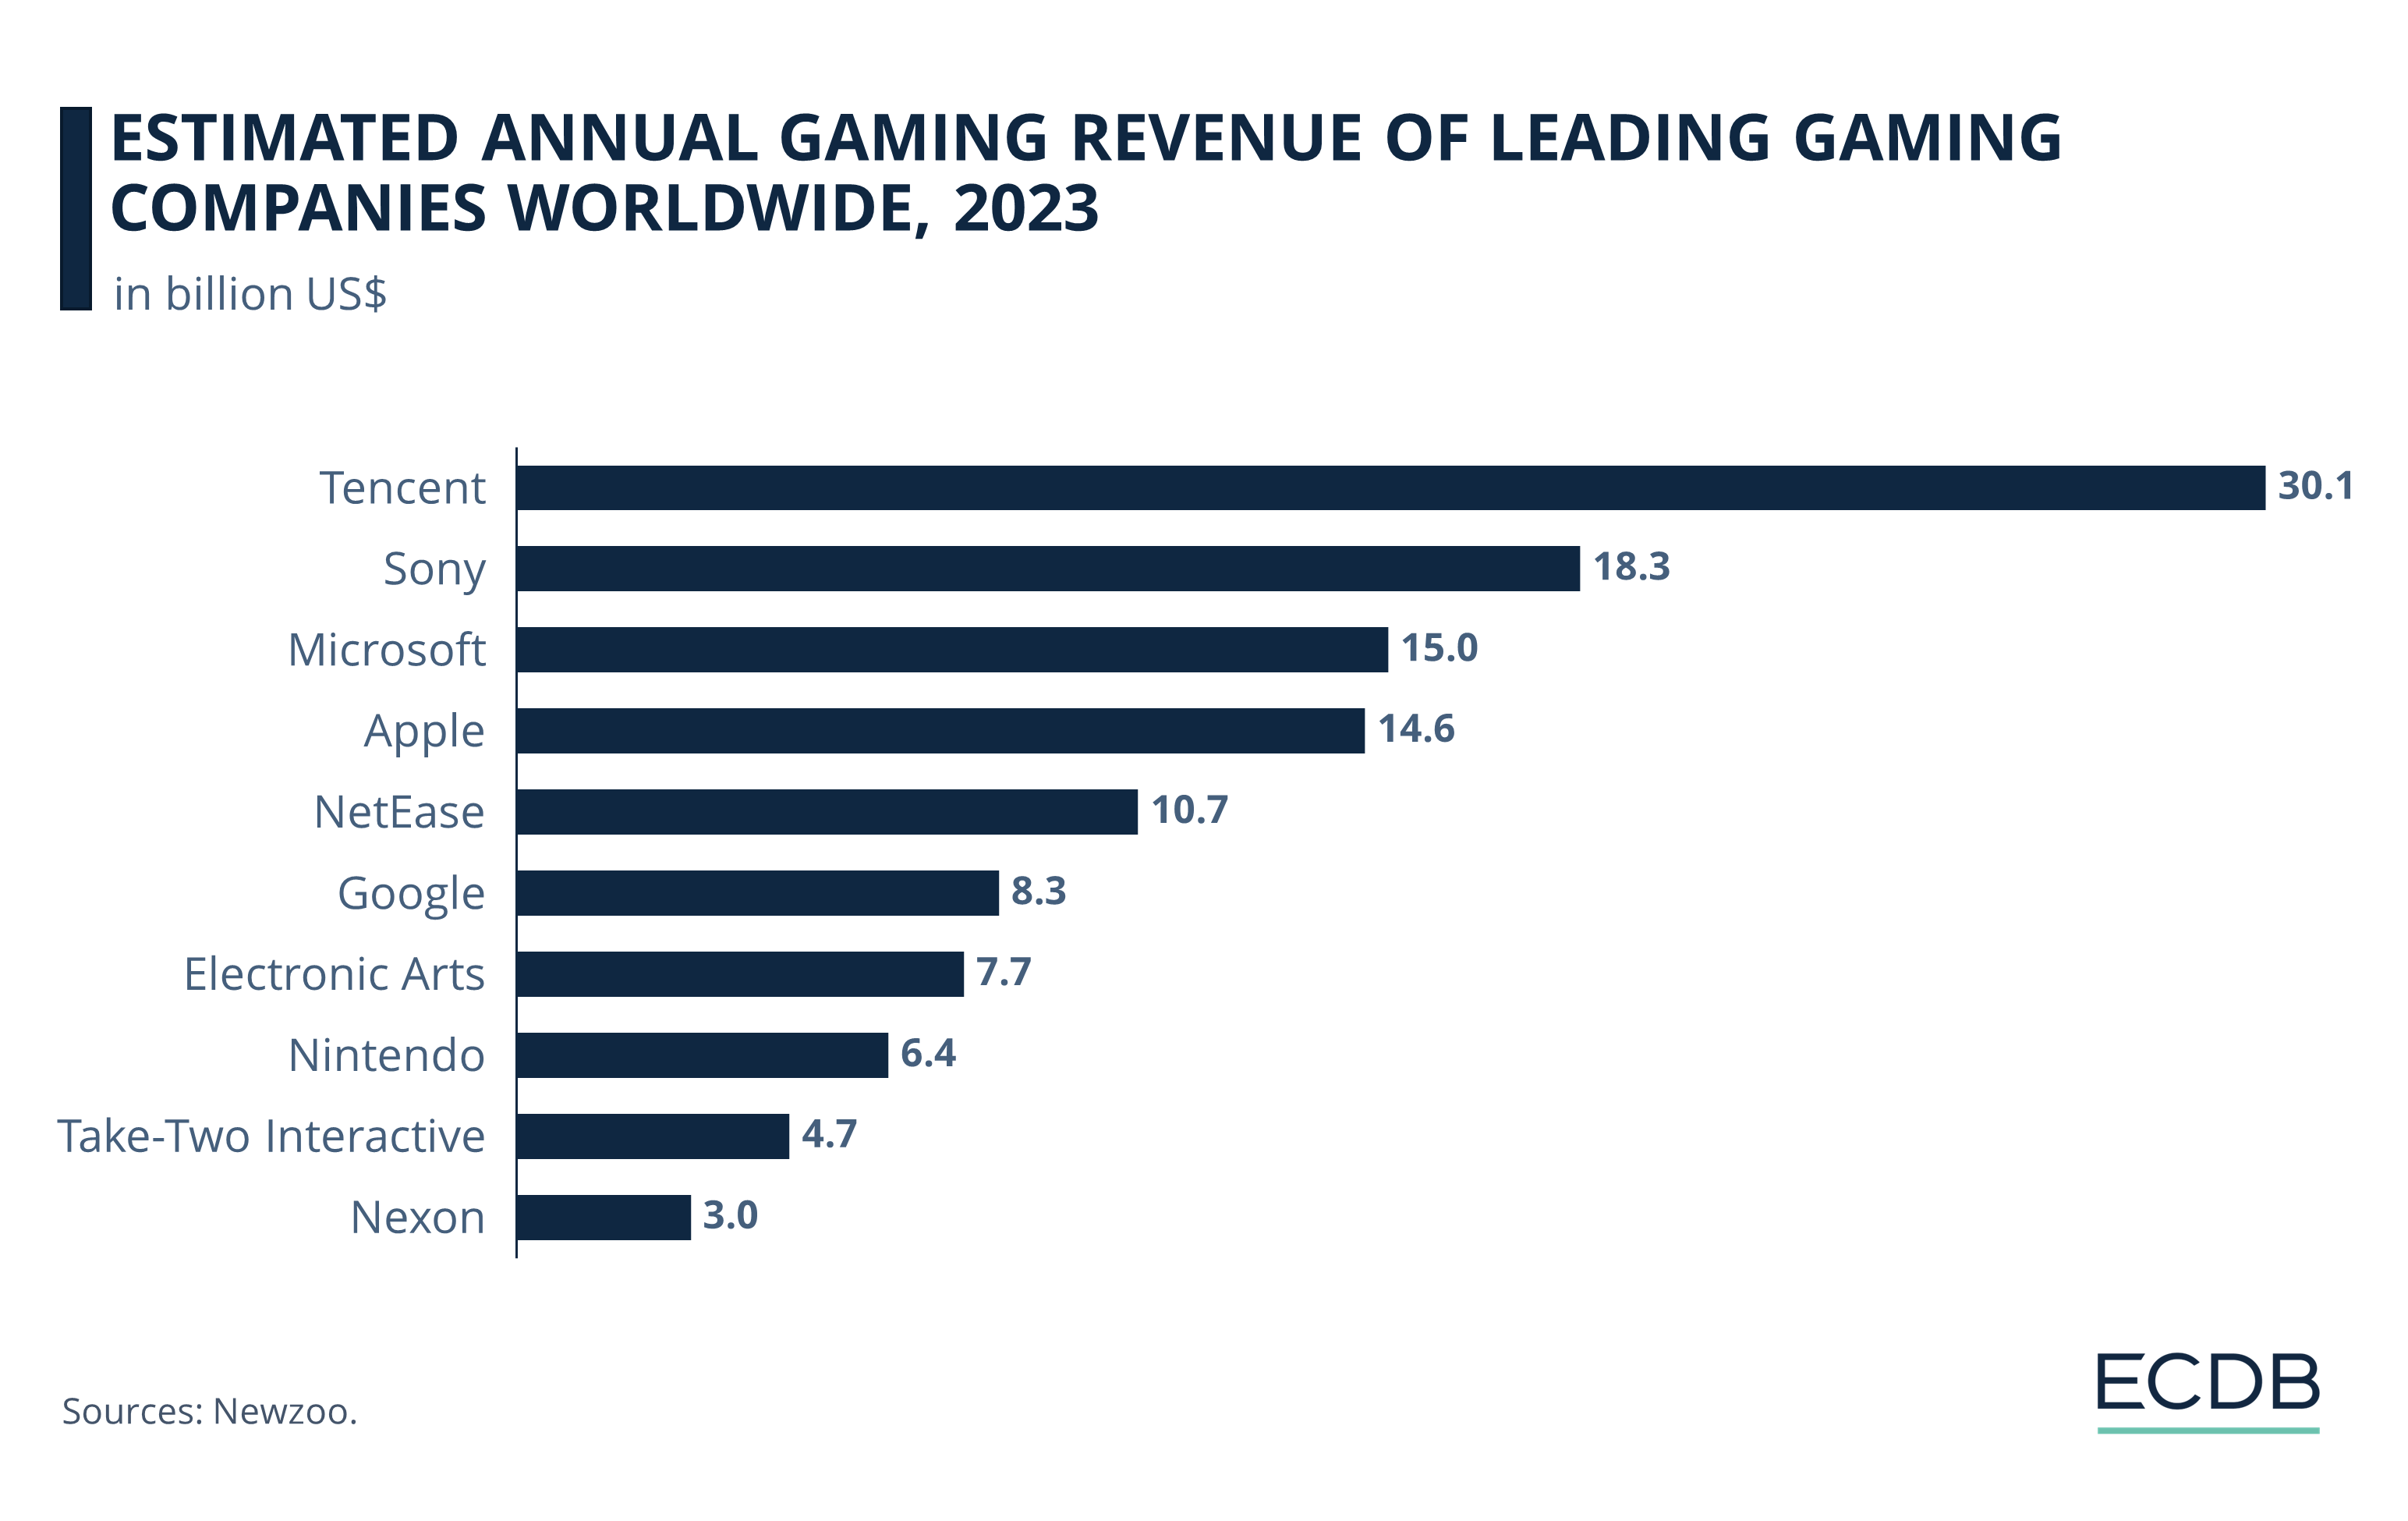 Estimated Annual Gaming Revenue of Leading Gaming Companies Worldwide, 2023